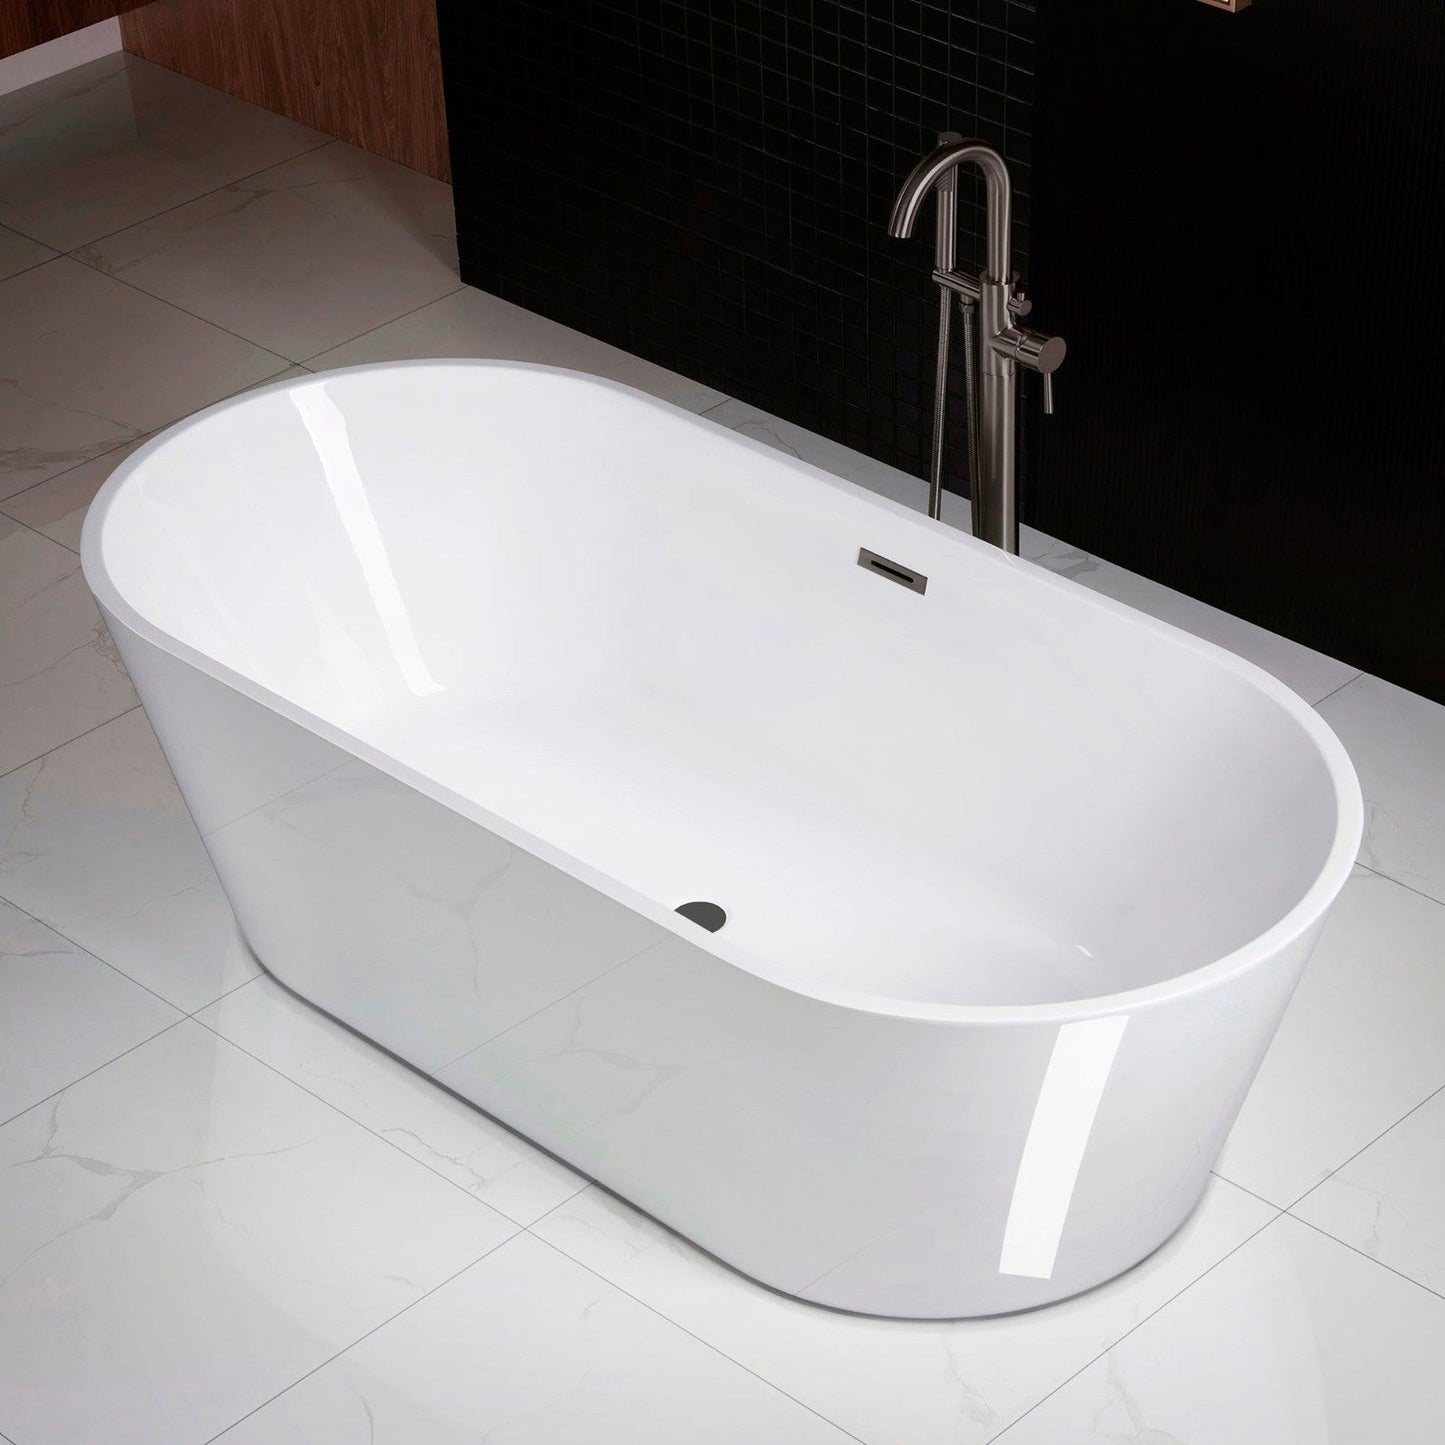 WoodBridge 71" White Acrylic Freestanding Contemporary Soaking Bathtub With Matte Black Drain, Overflow, F0025MBRD Tub Filler and Caddy Tray